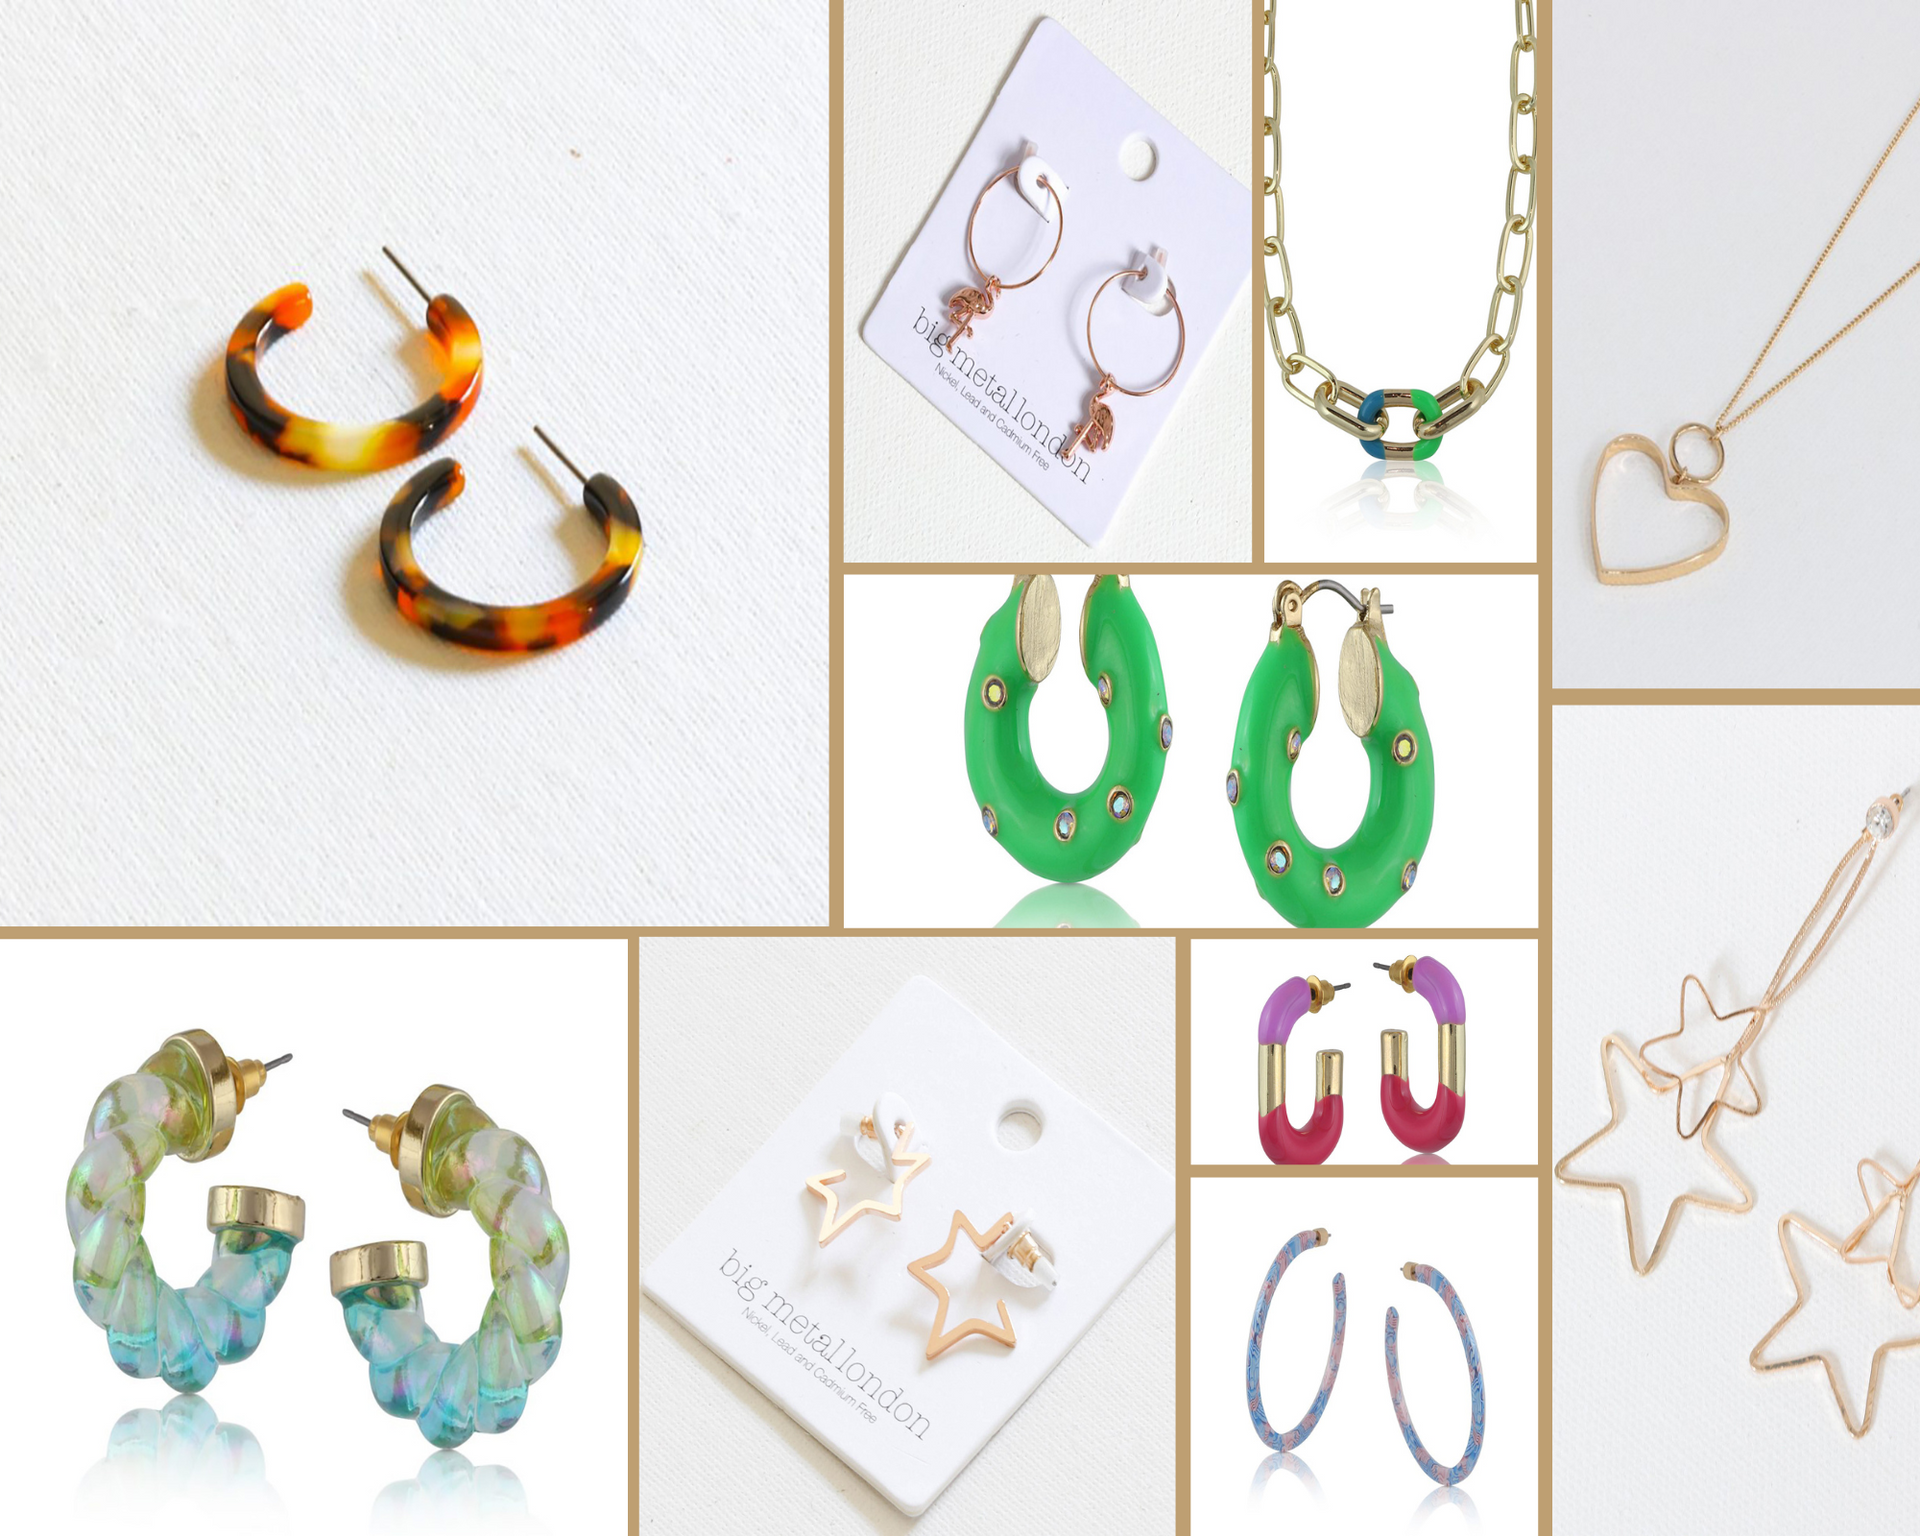 Why should your jewellery choices be environmentally friendly?